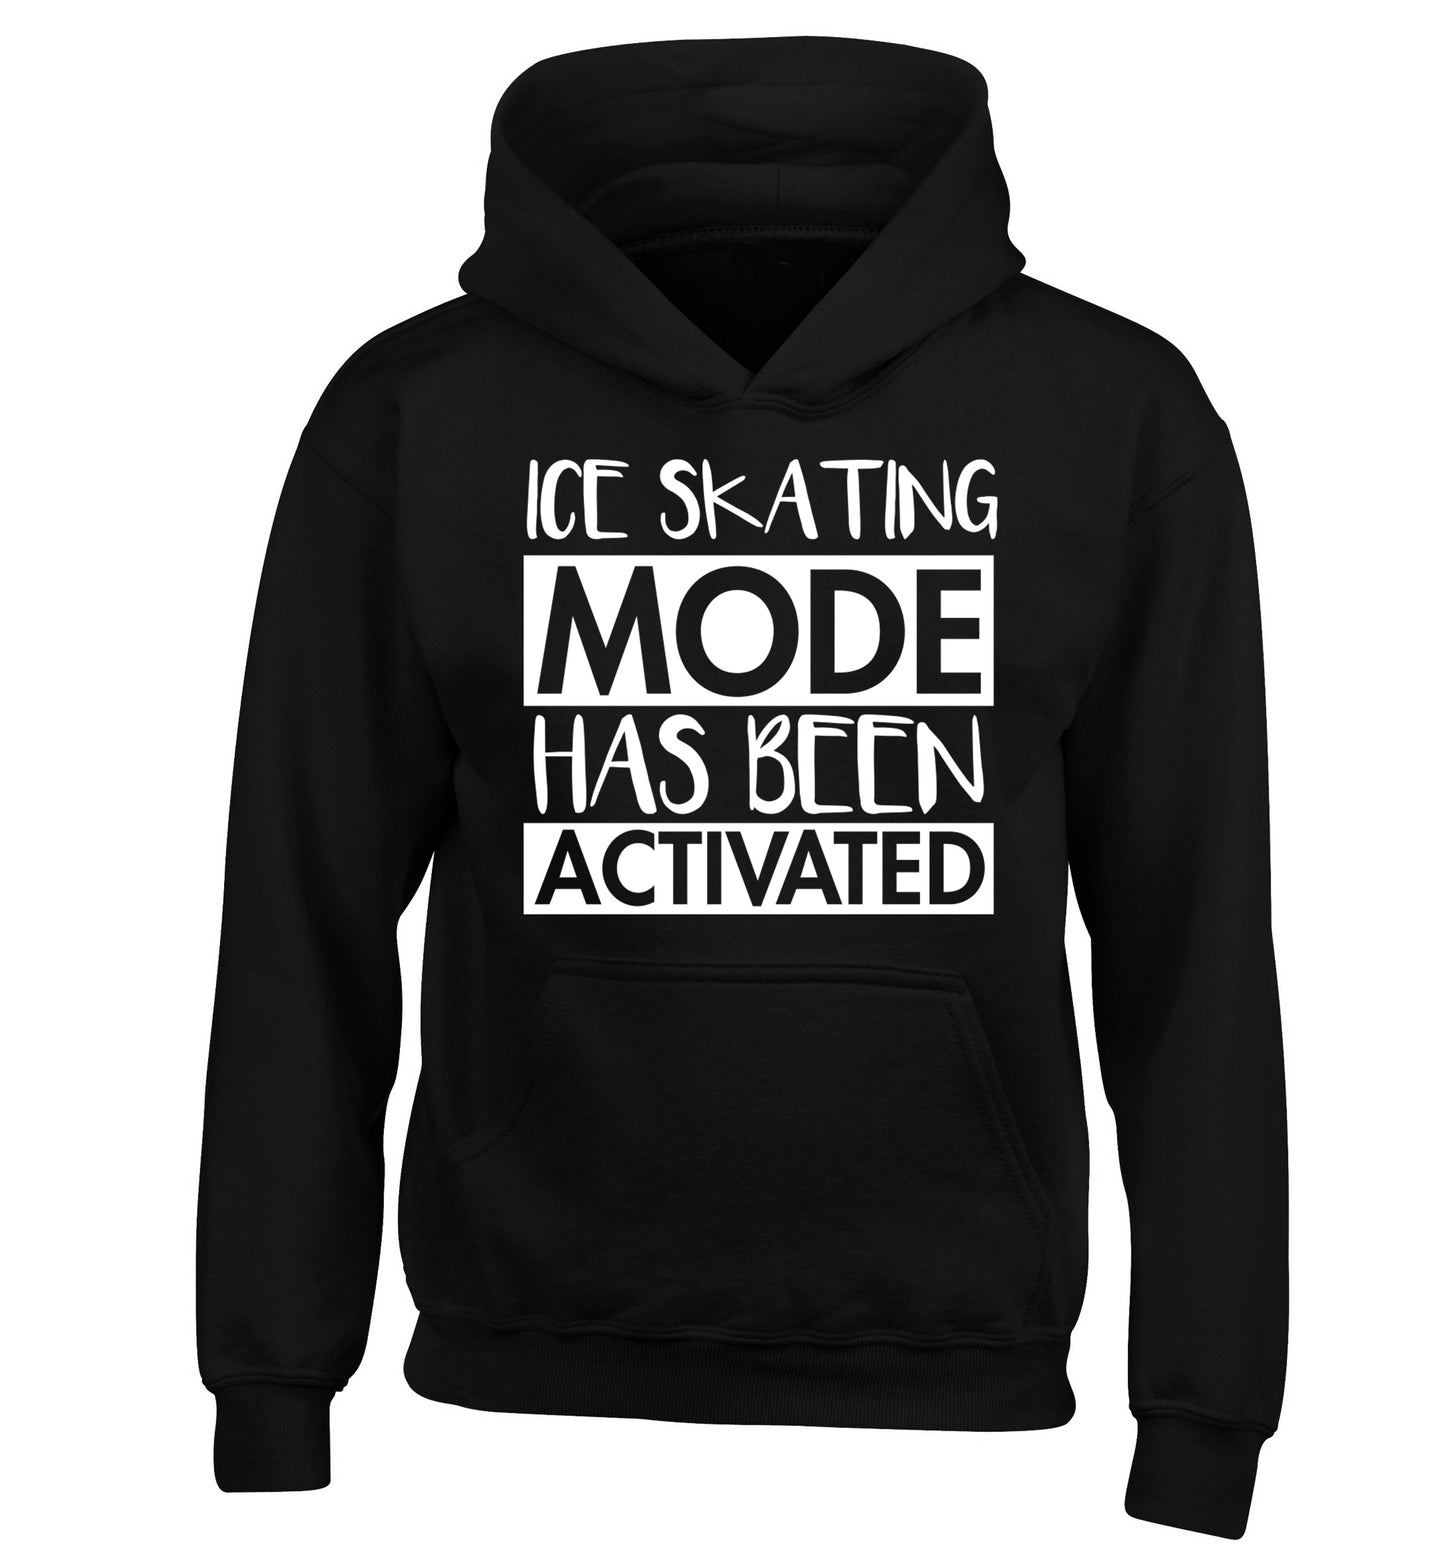 Ice skating mode activated children's black hoodie 12-14 Years